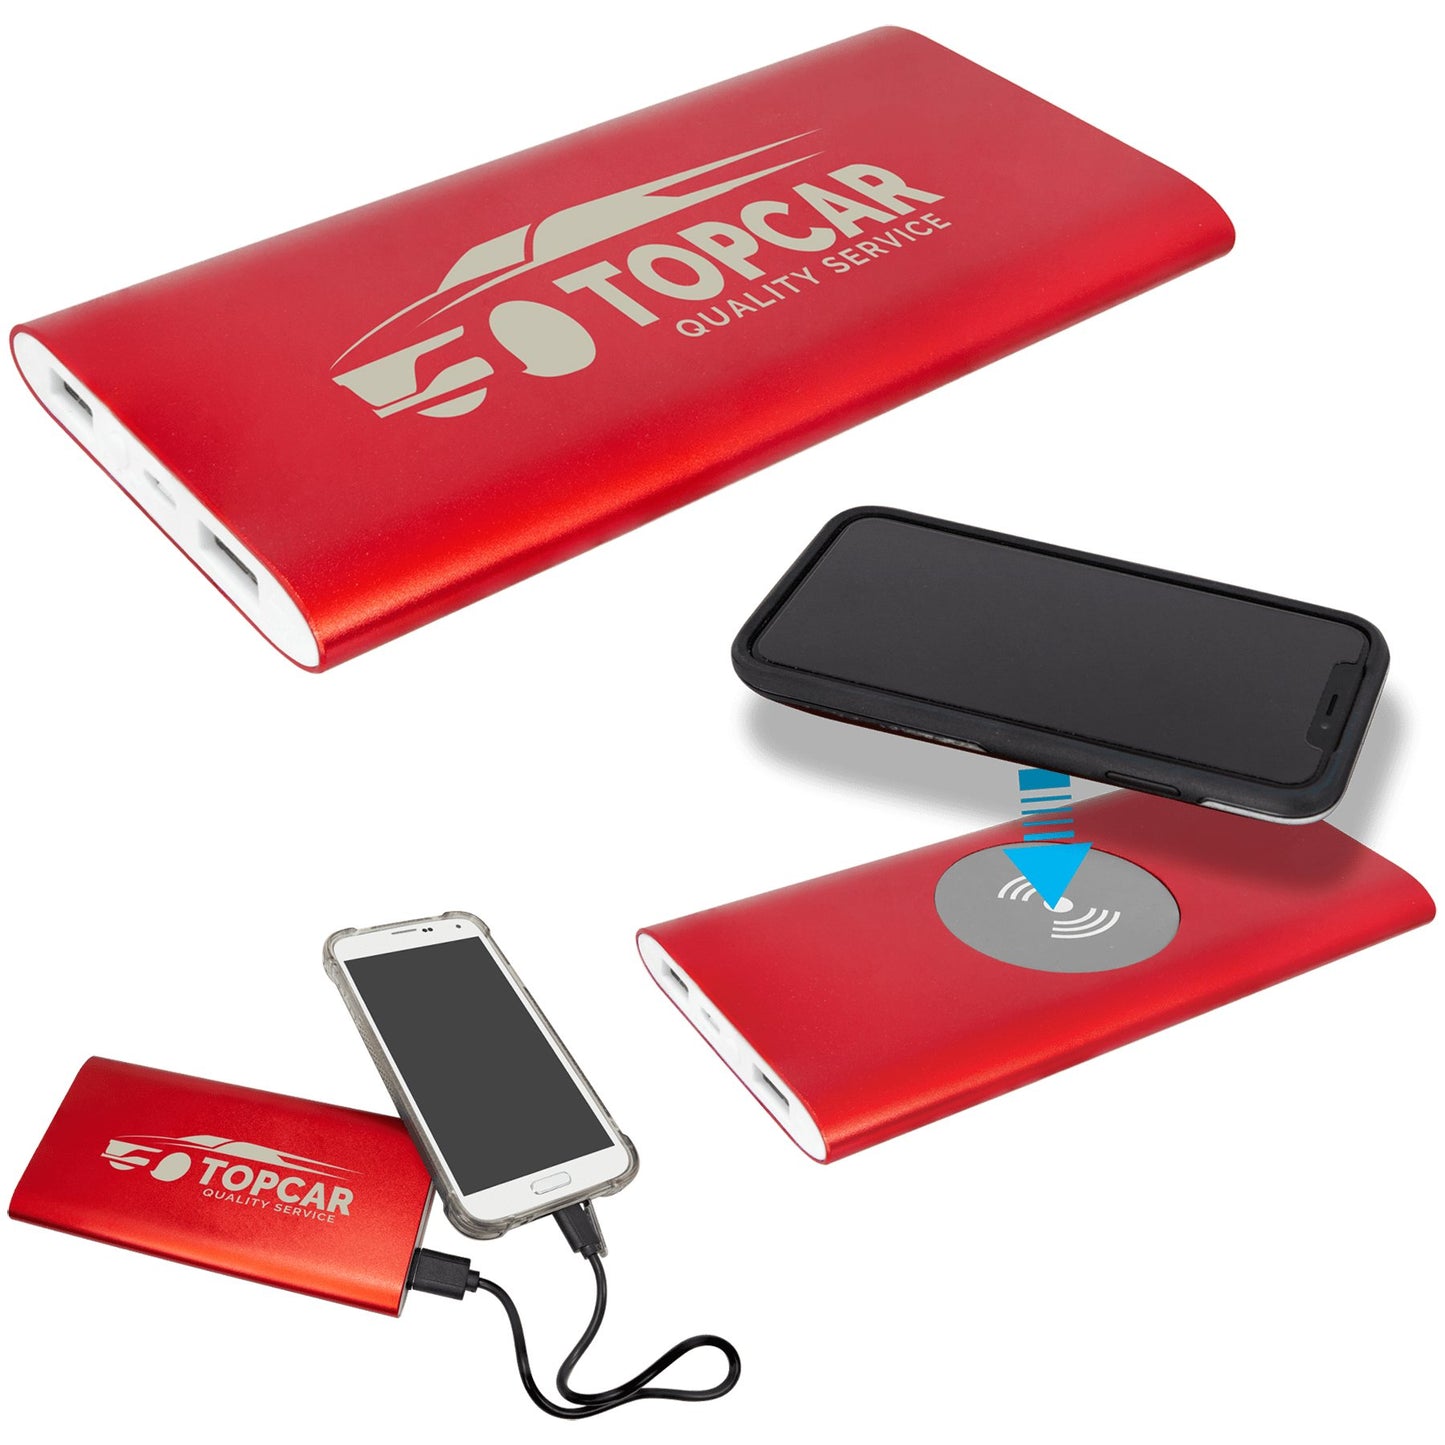 Personalizable Handy Power Bank: - Legacy Creator IncRed